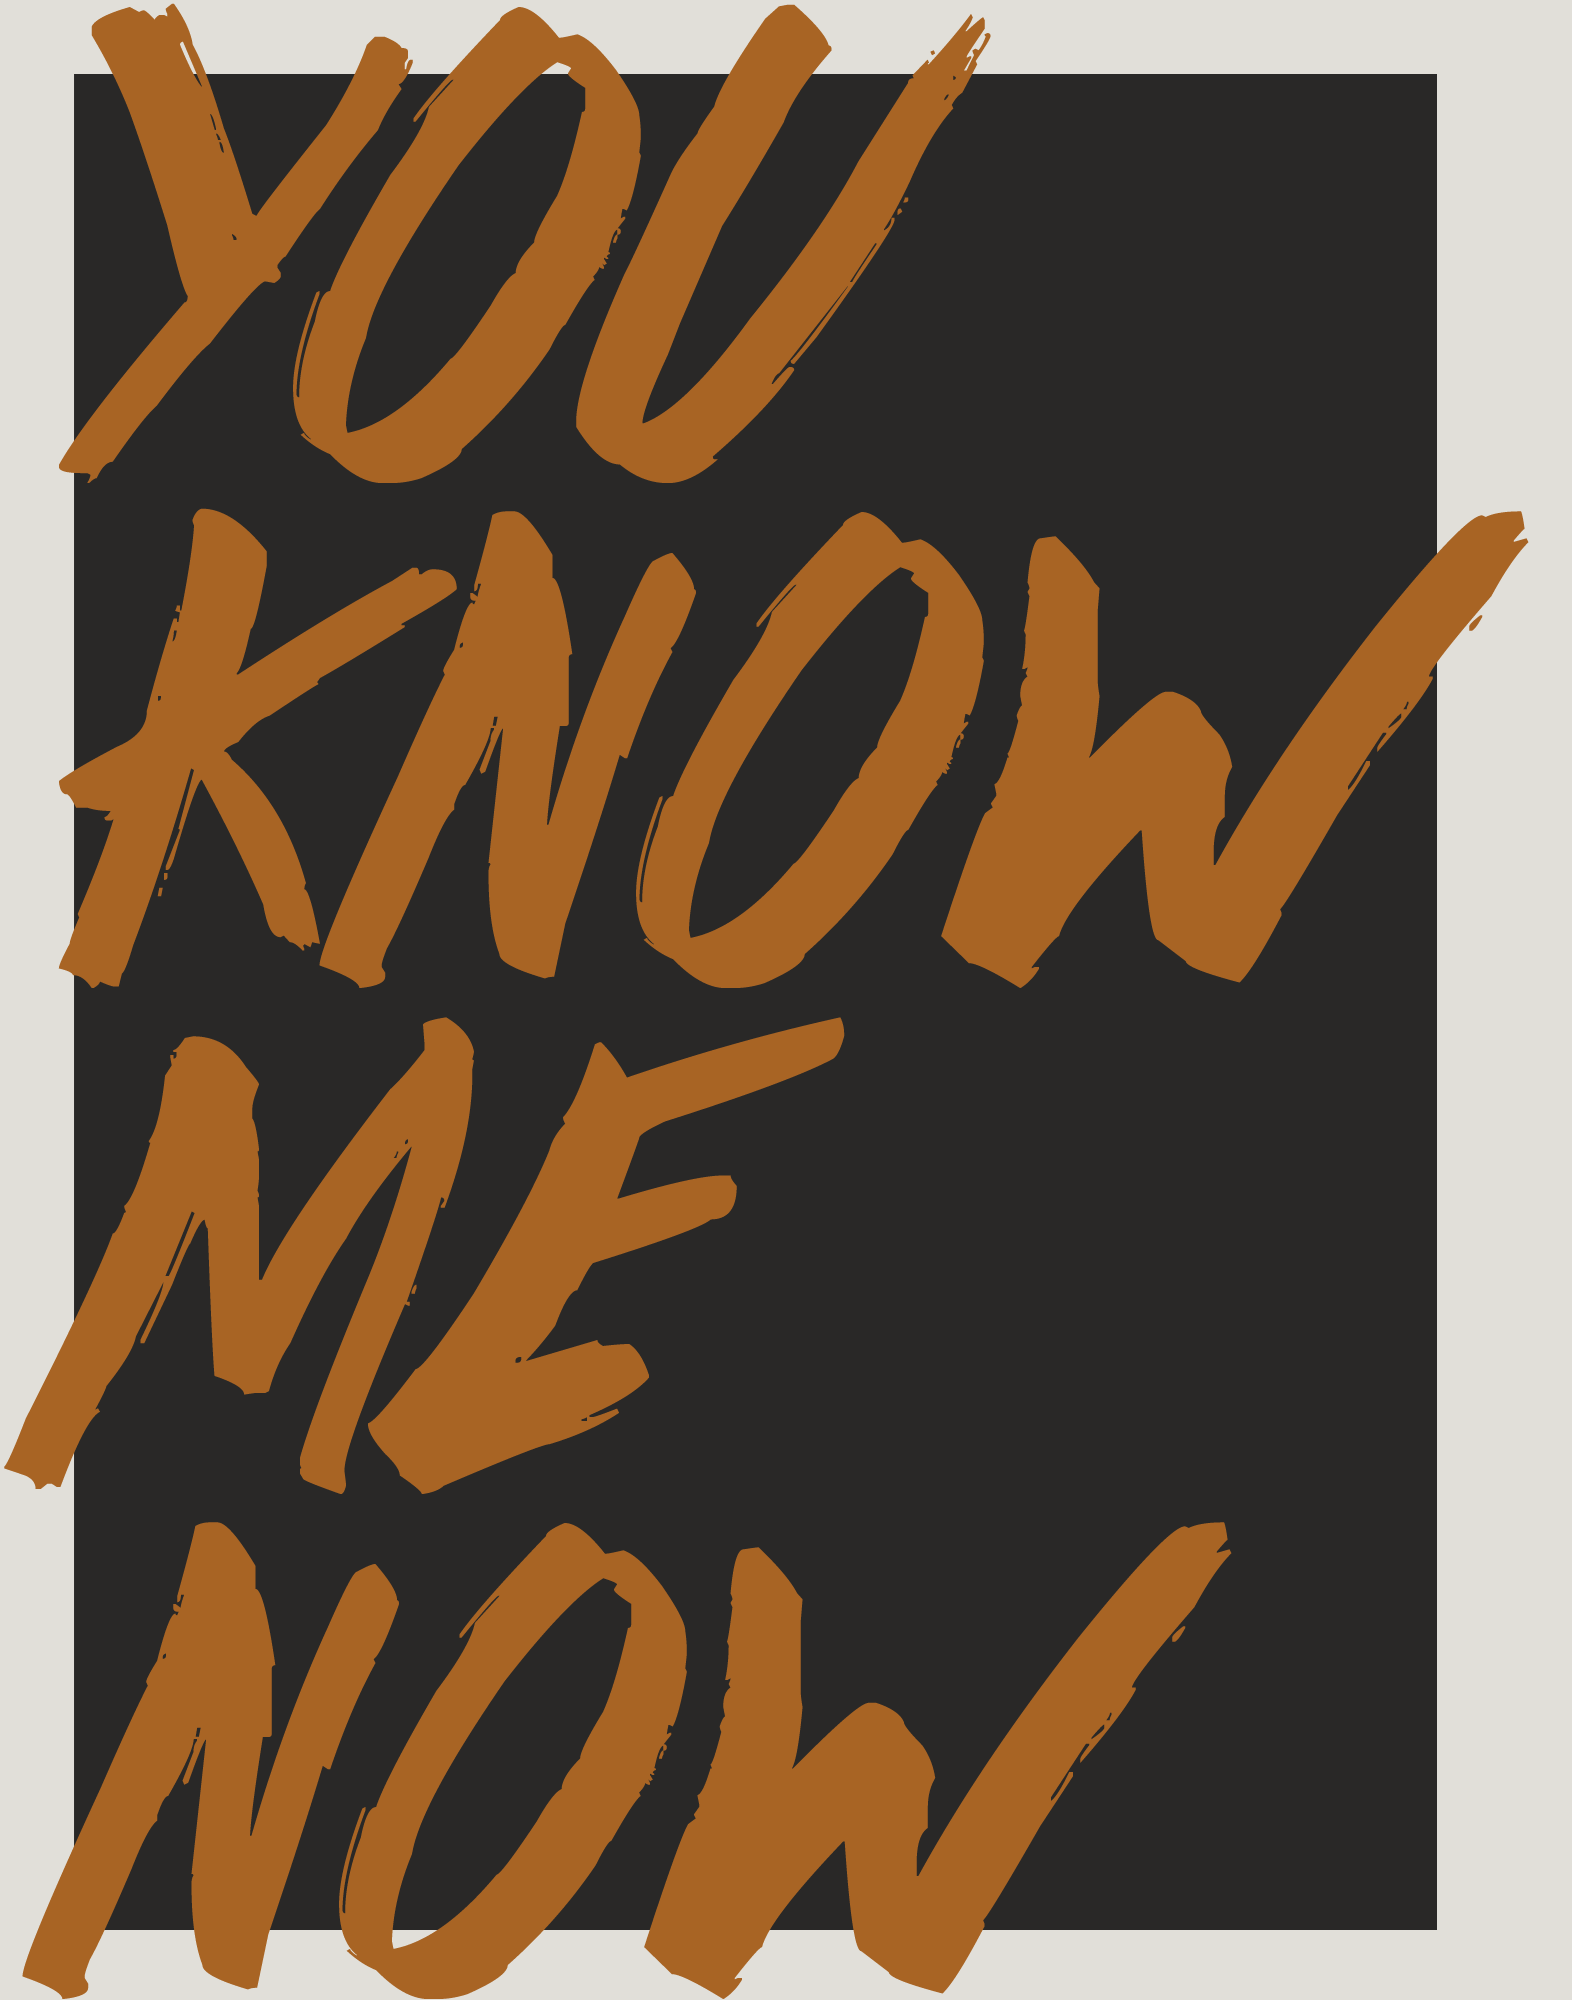 If You Don't Know Me by Now - Wikipedia